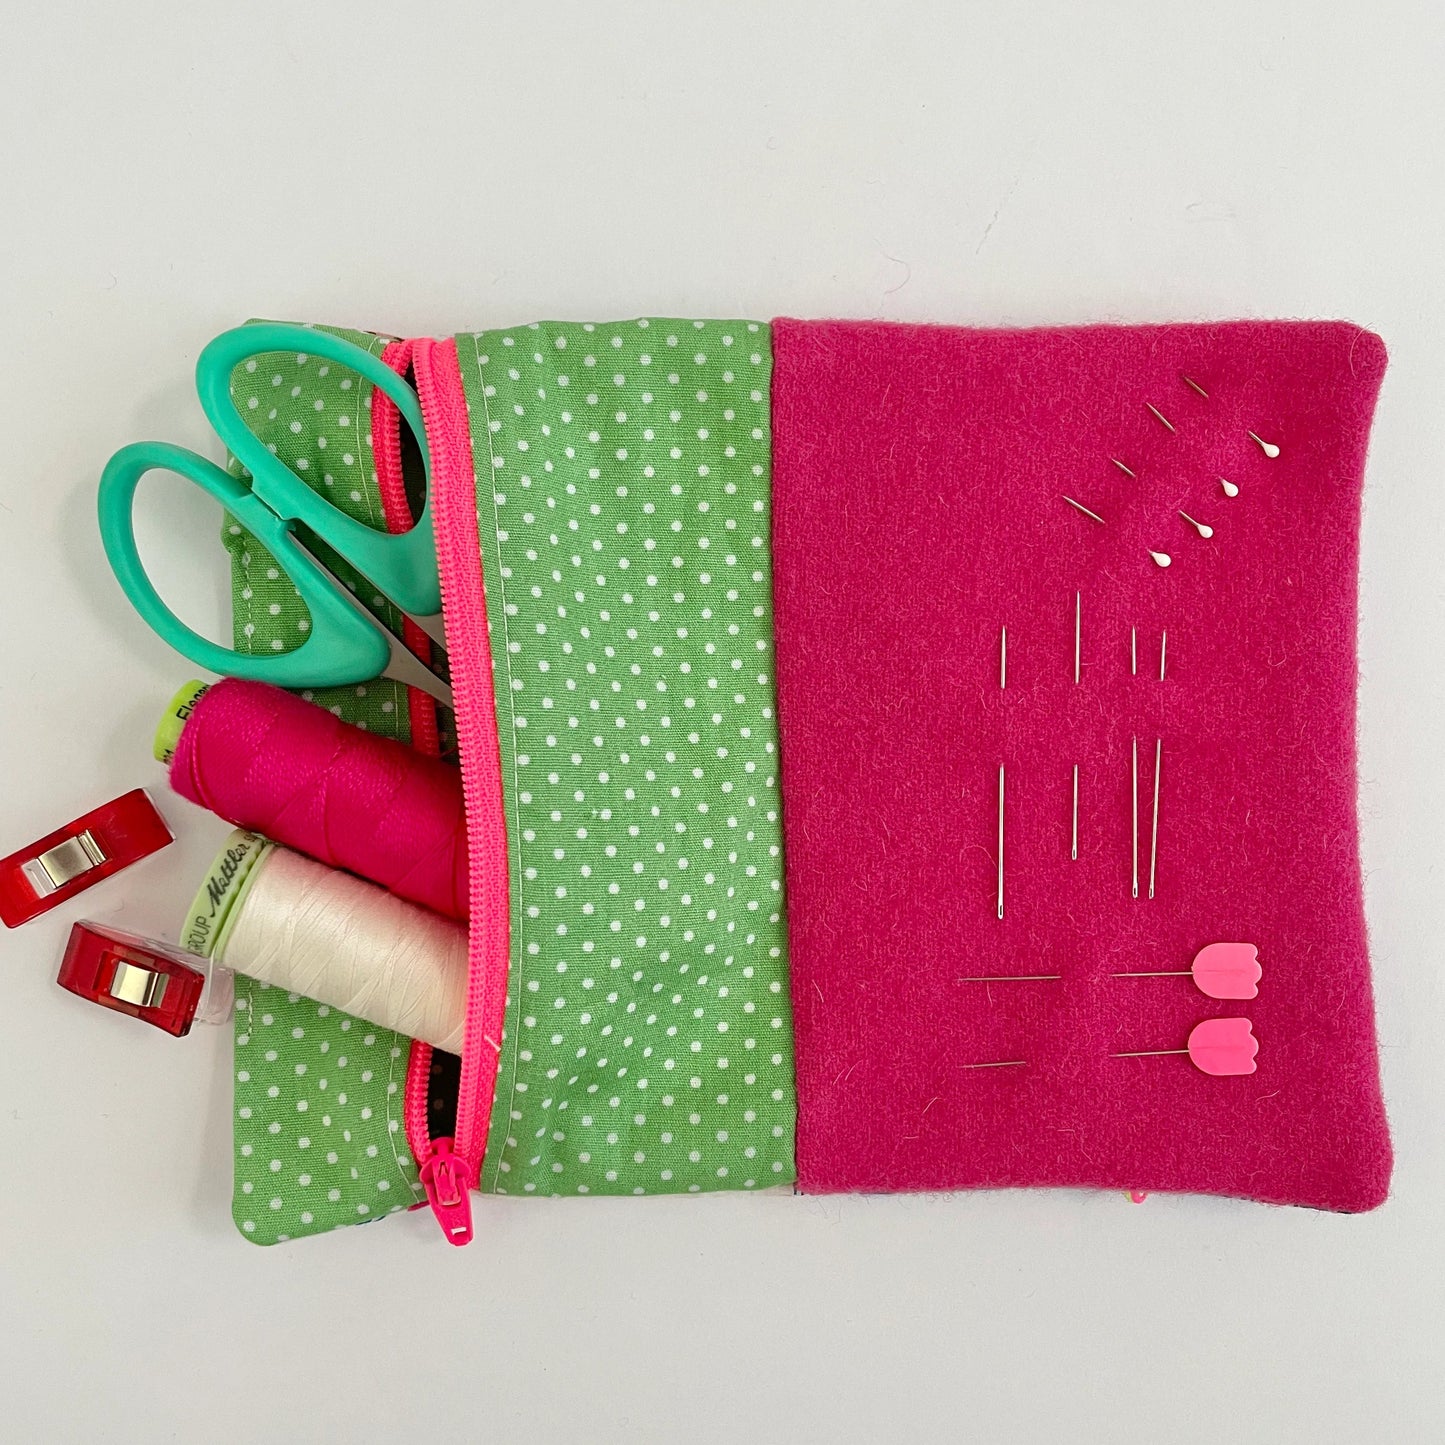 A Little More Sewing and Needle Case Kit and Pattern